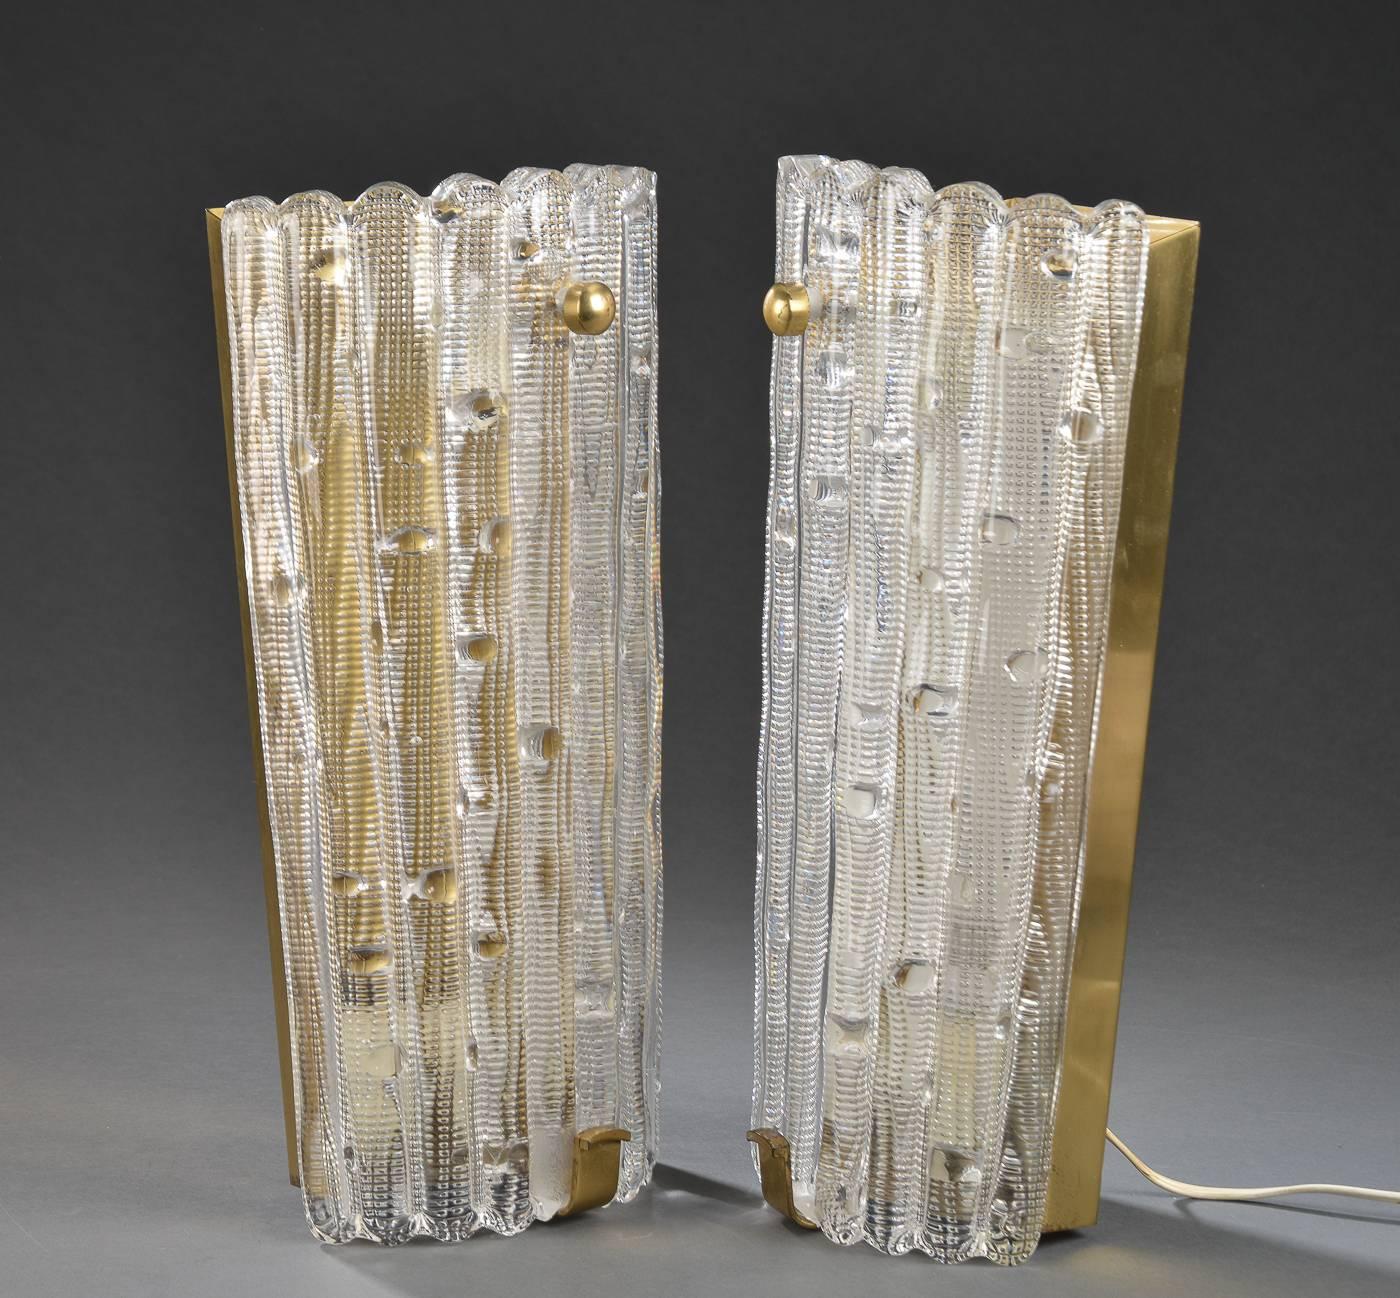 Pair of large-scale sconces of pressed glass and brass wall sconces designed by Carl Fagerlund for Orrefors of Sweden, circa 1950s-1960s.